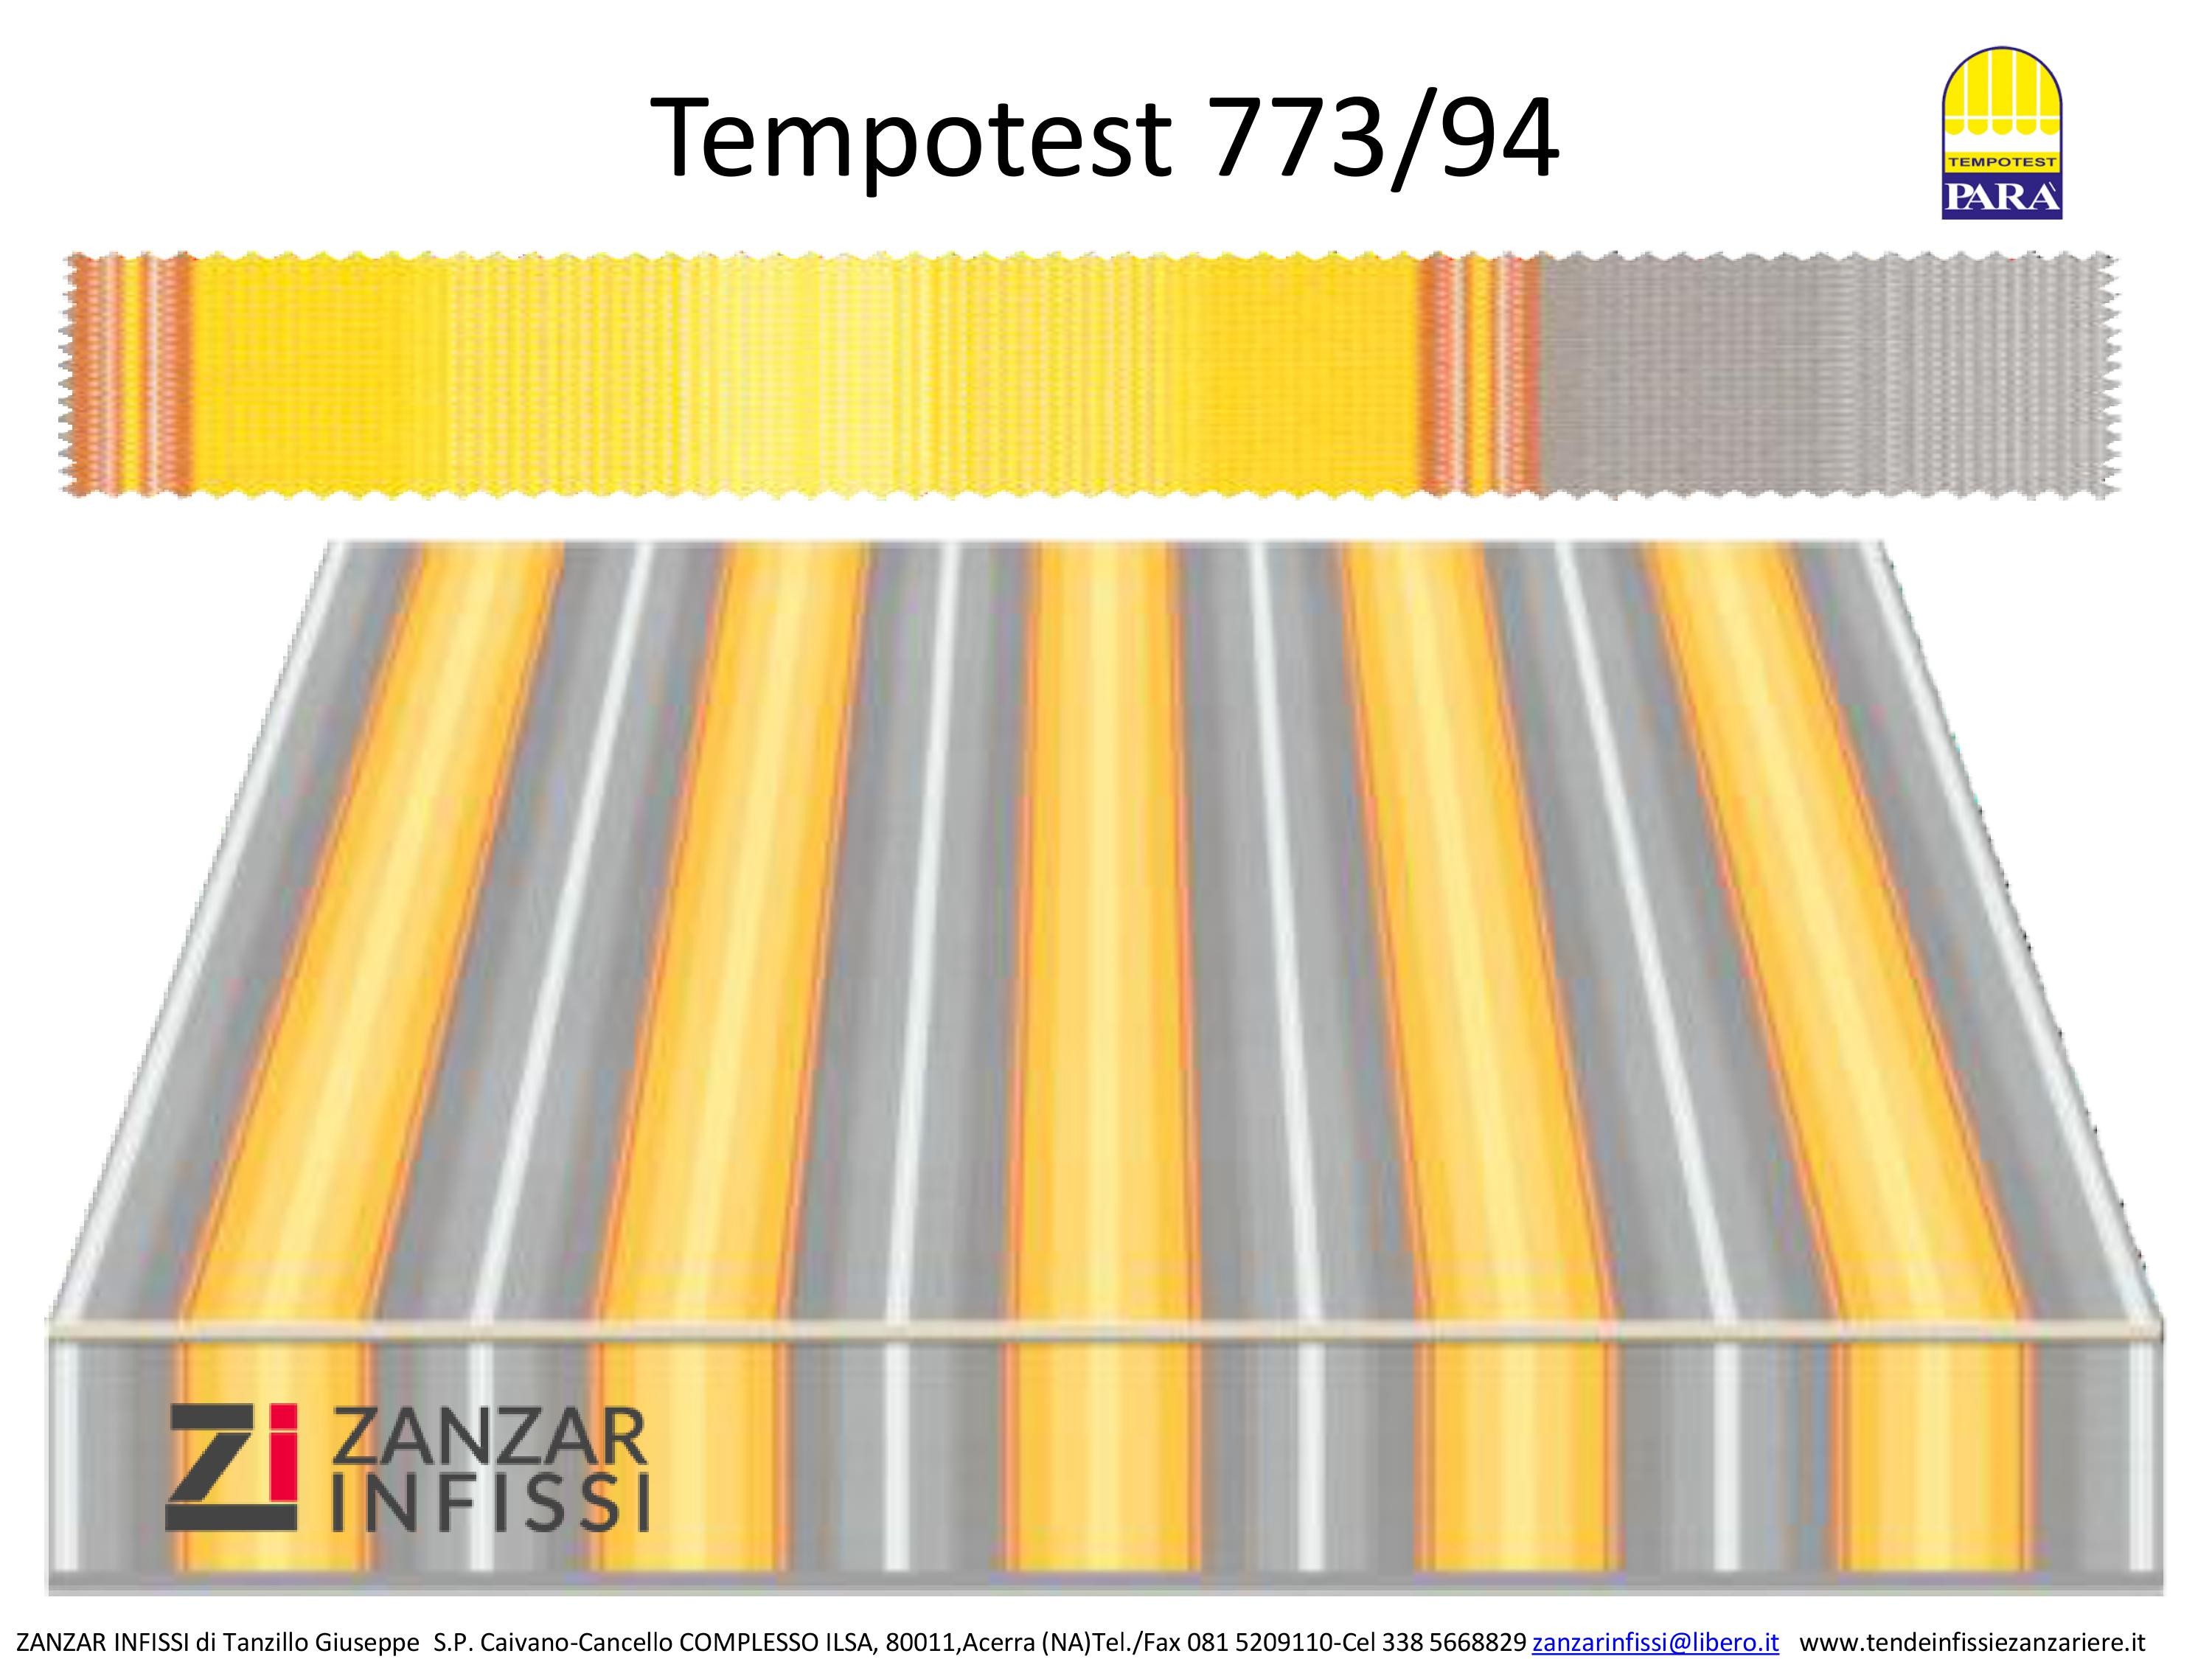 Tempotest 773/94